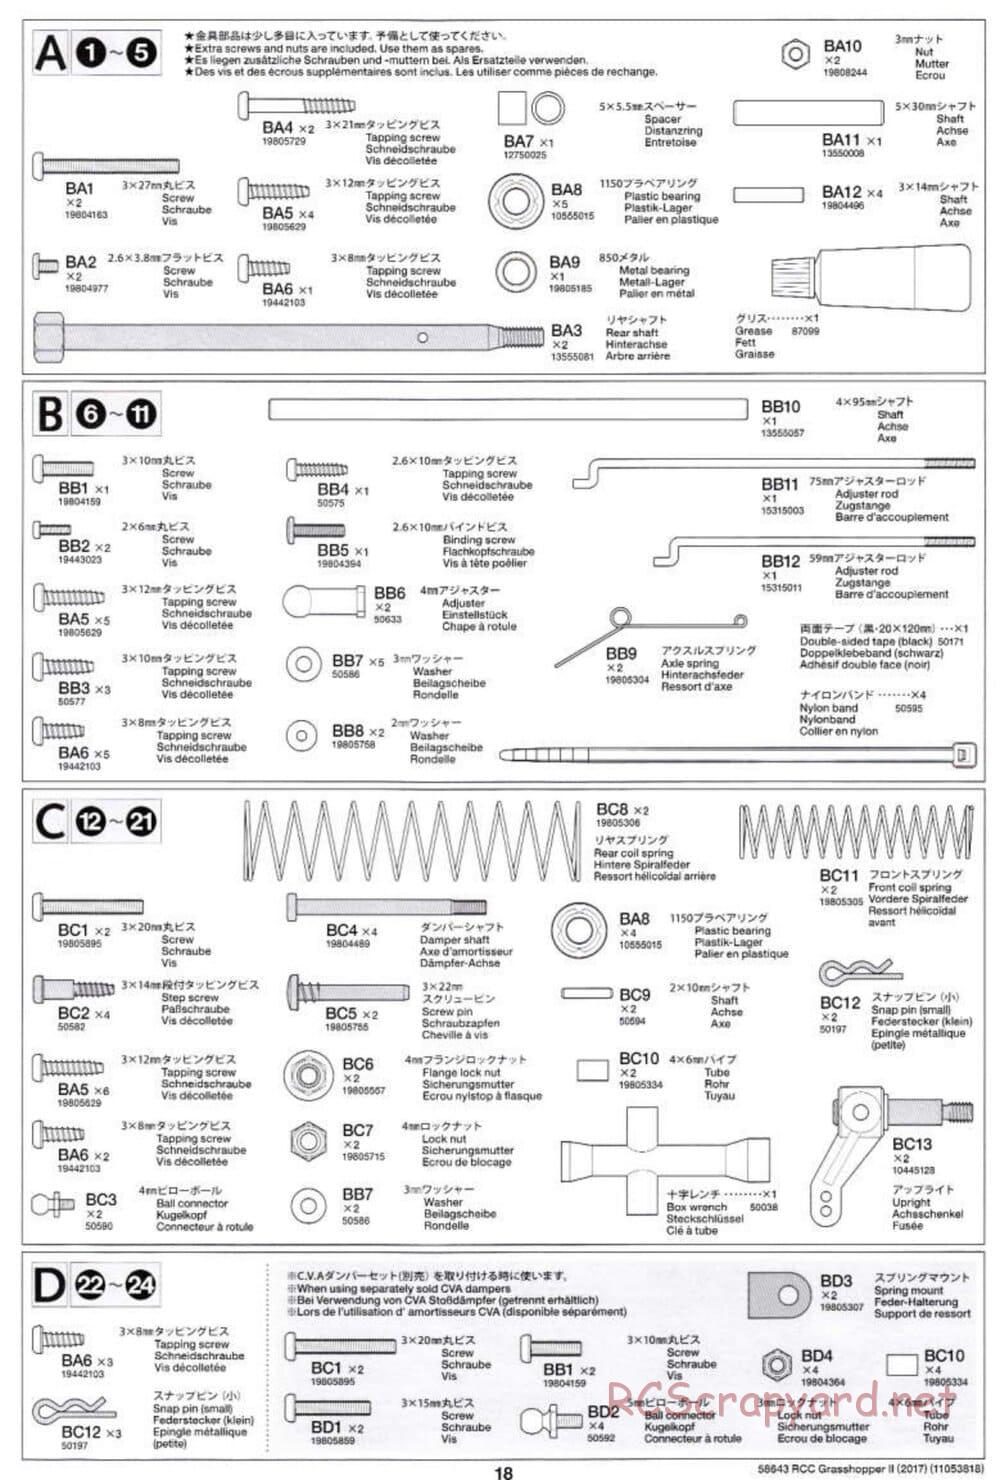 Tamiya - The Grasshopper II (2017) - GH Chassis - Manual - Page 18